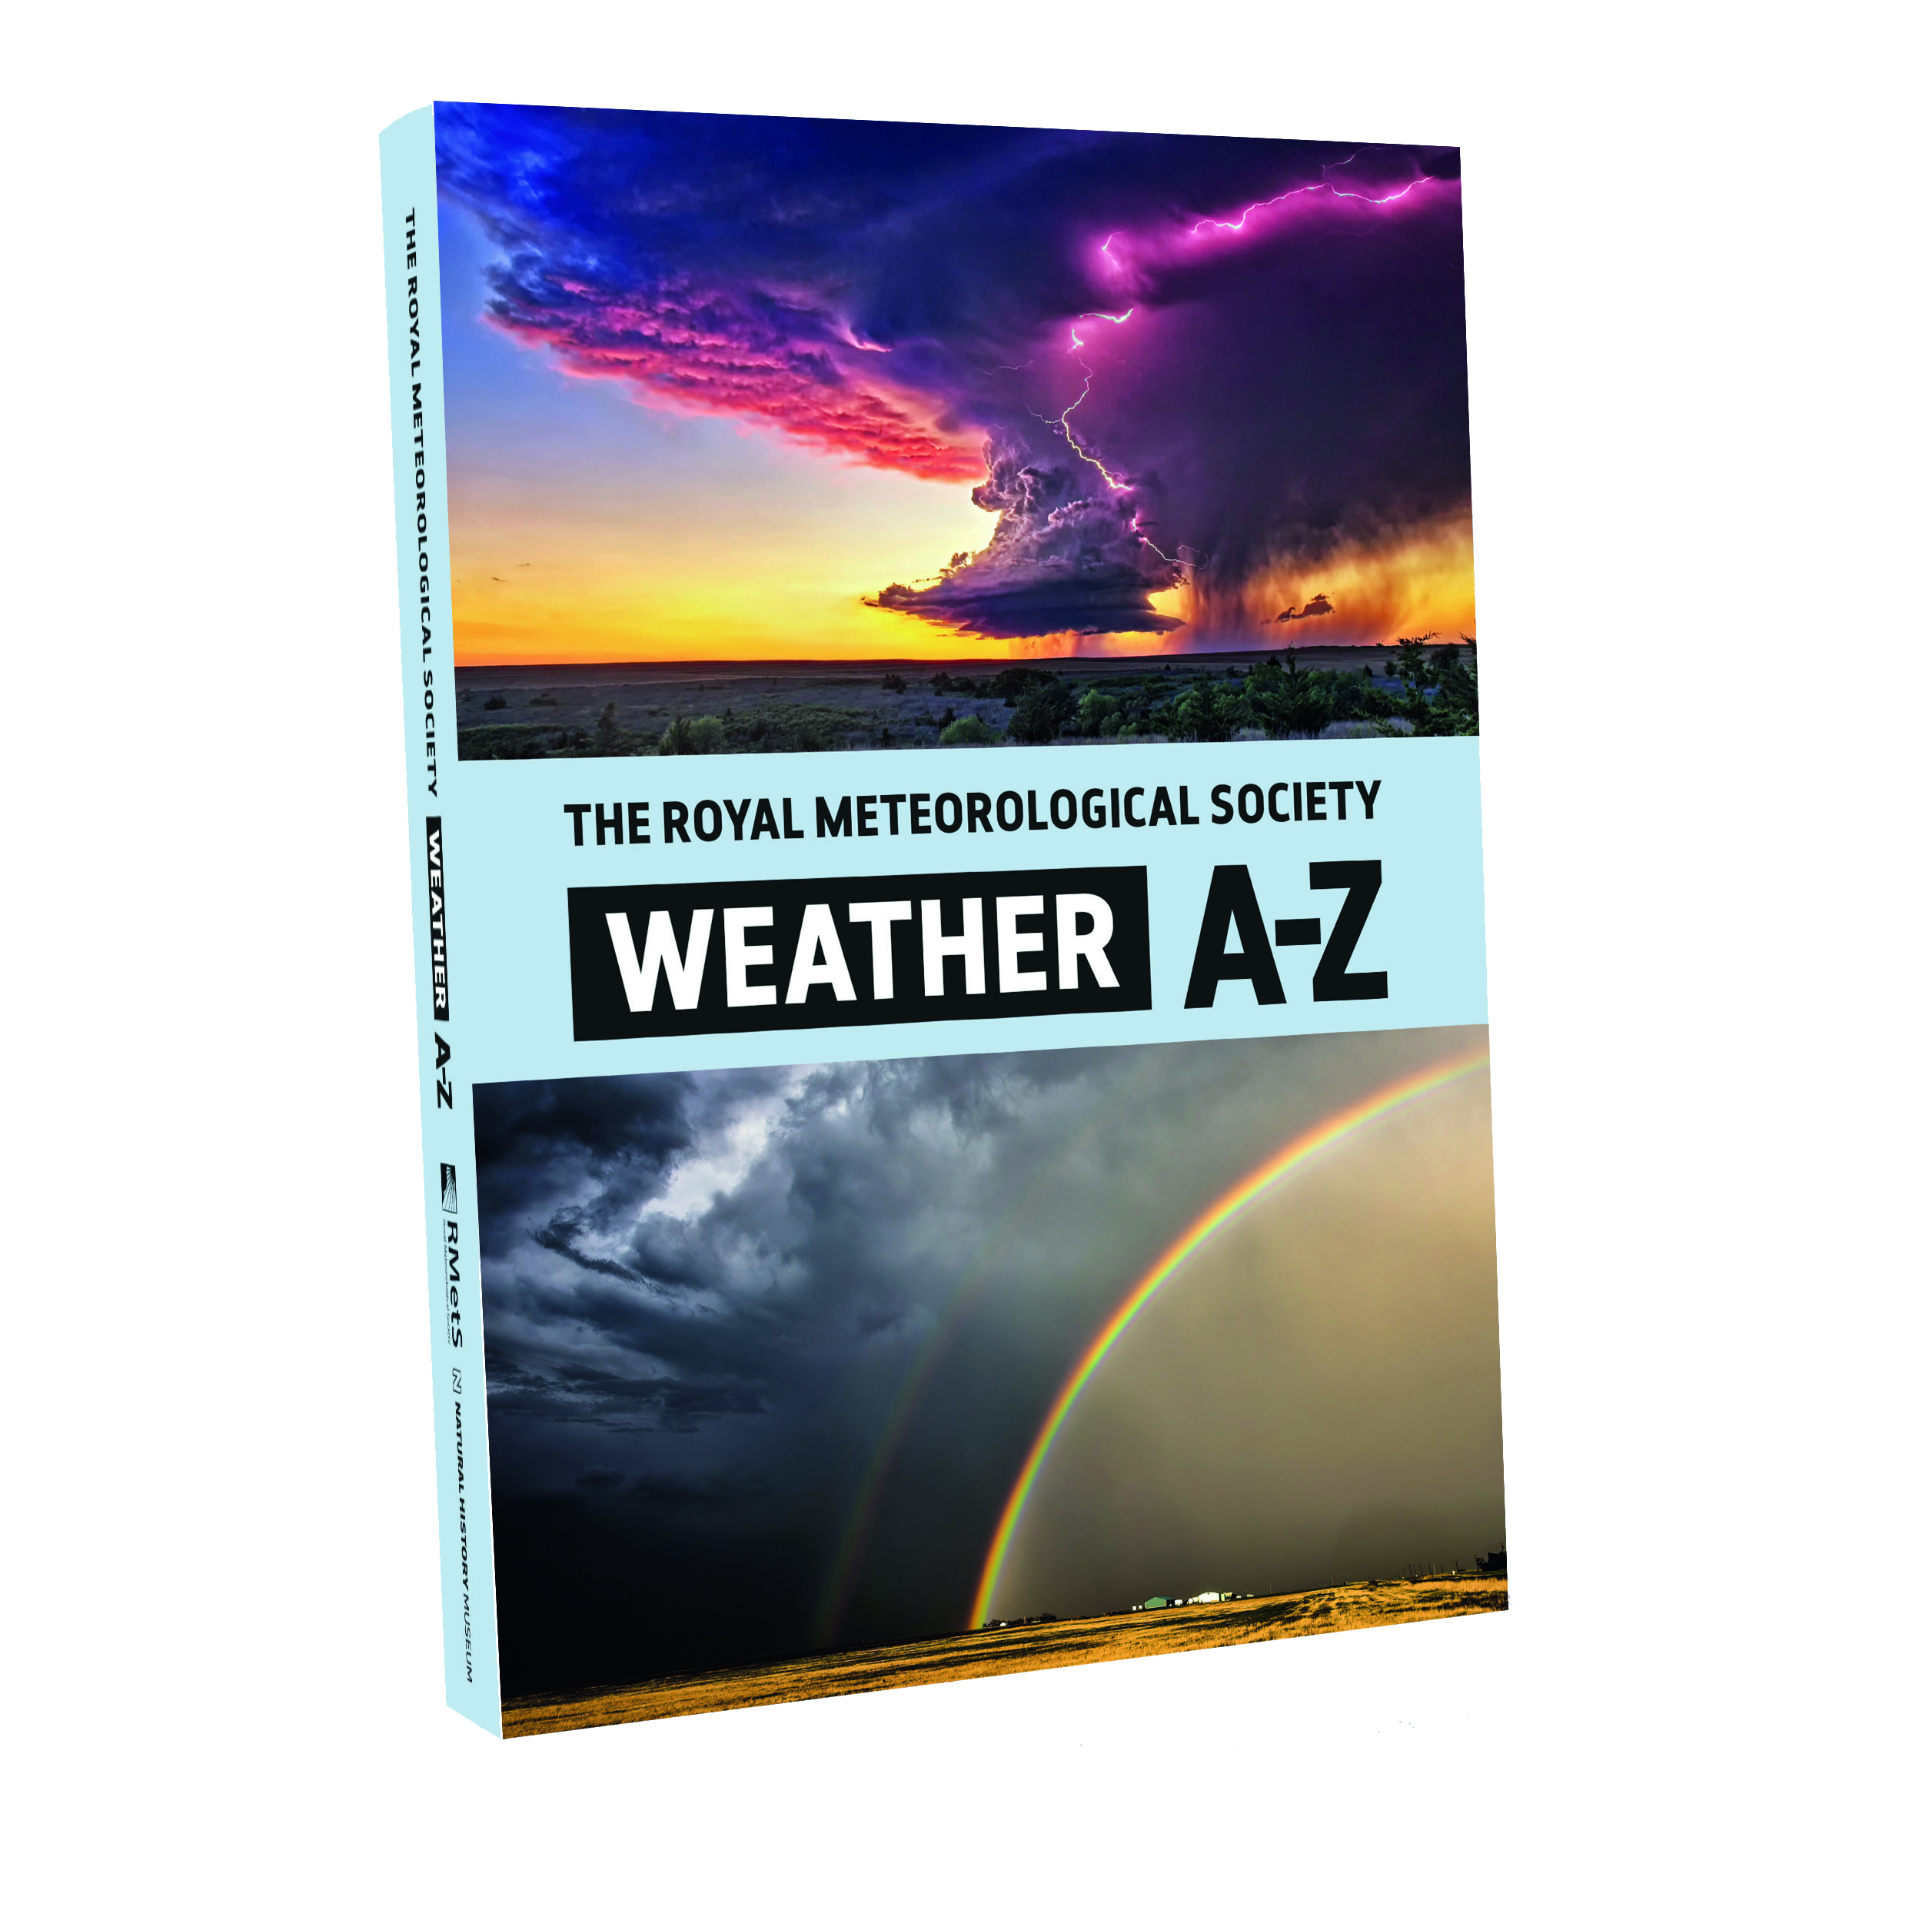 Weather A-Z book